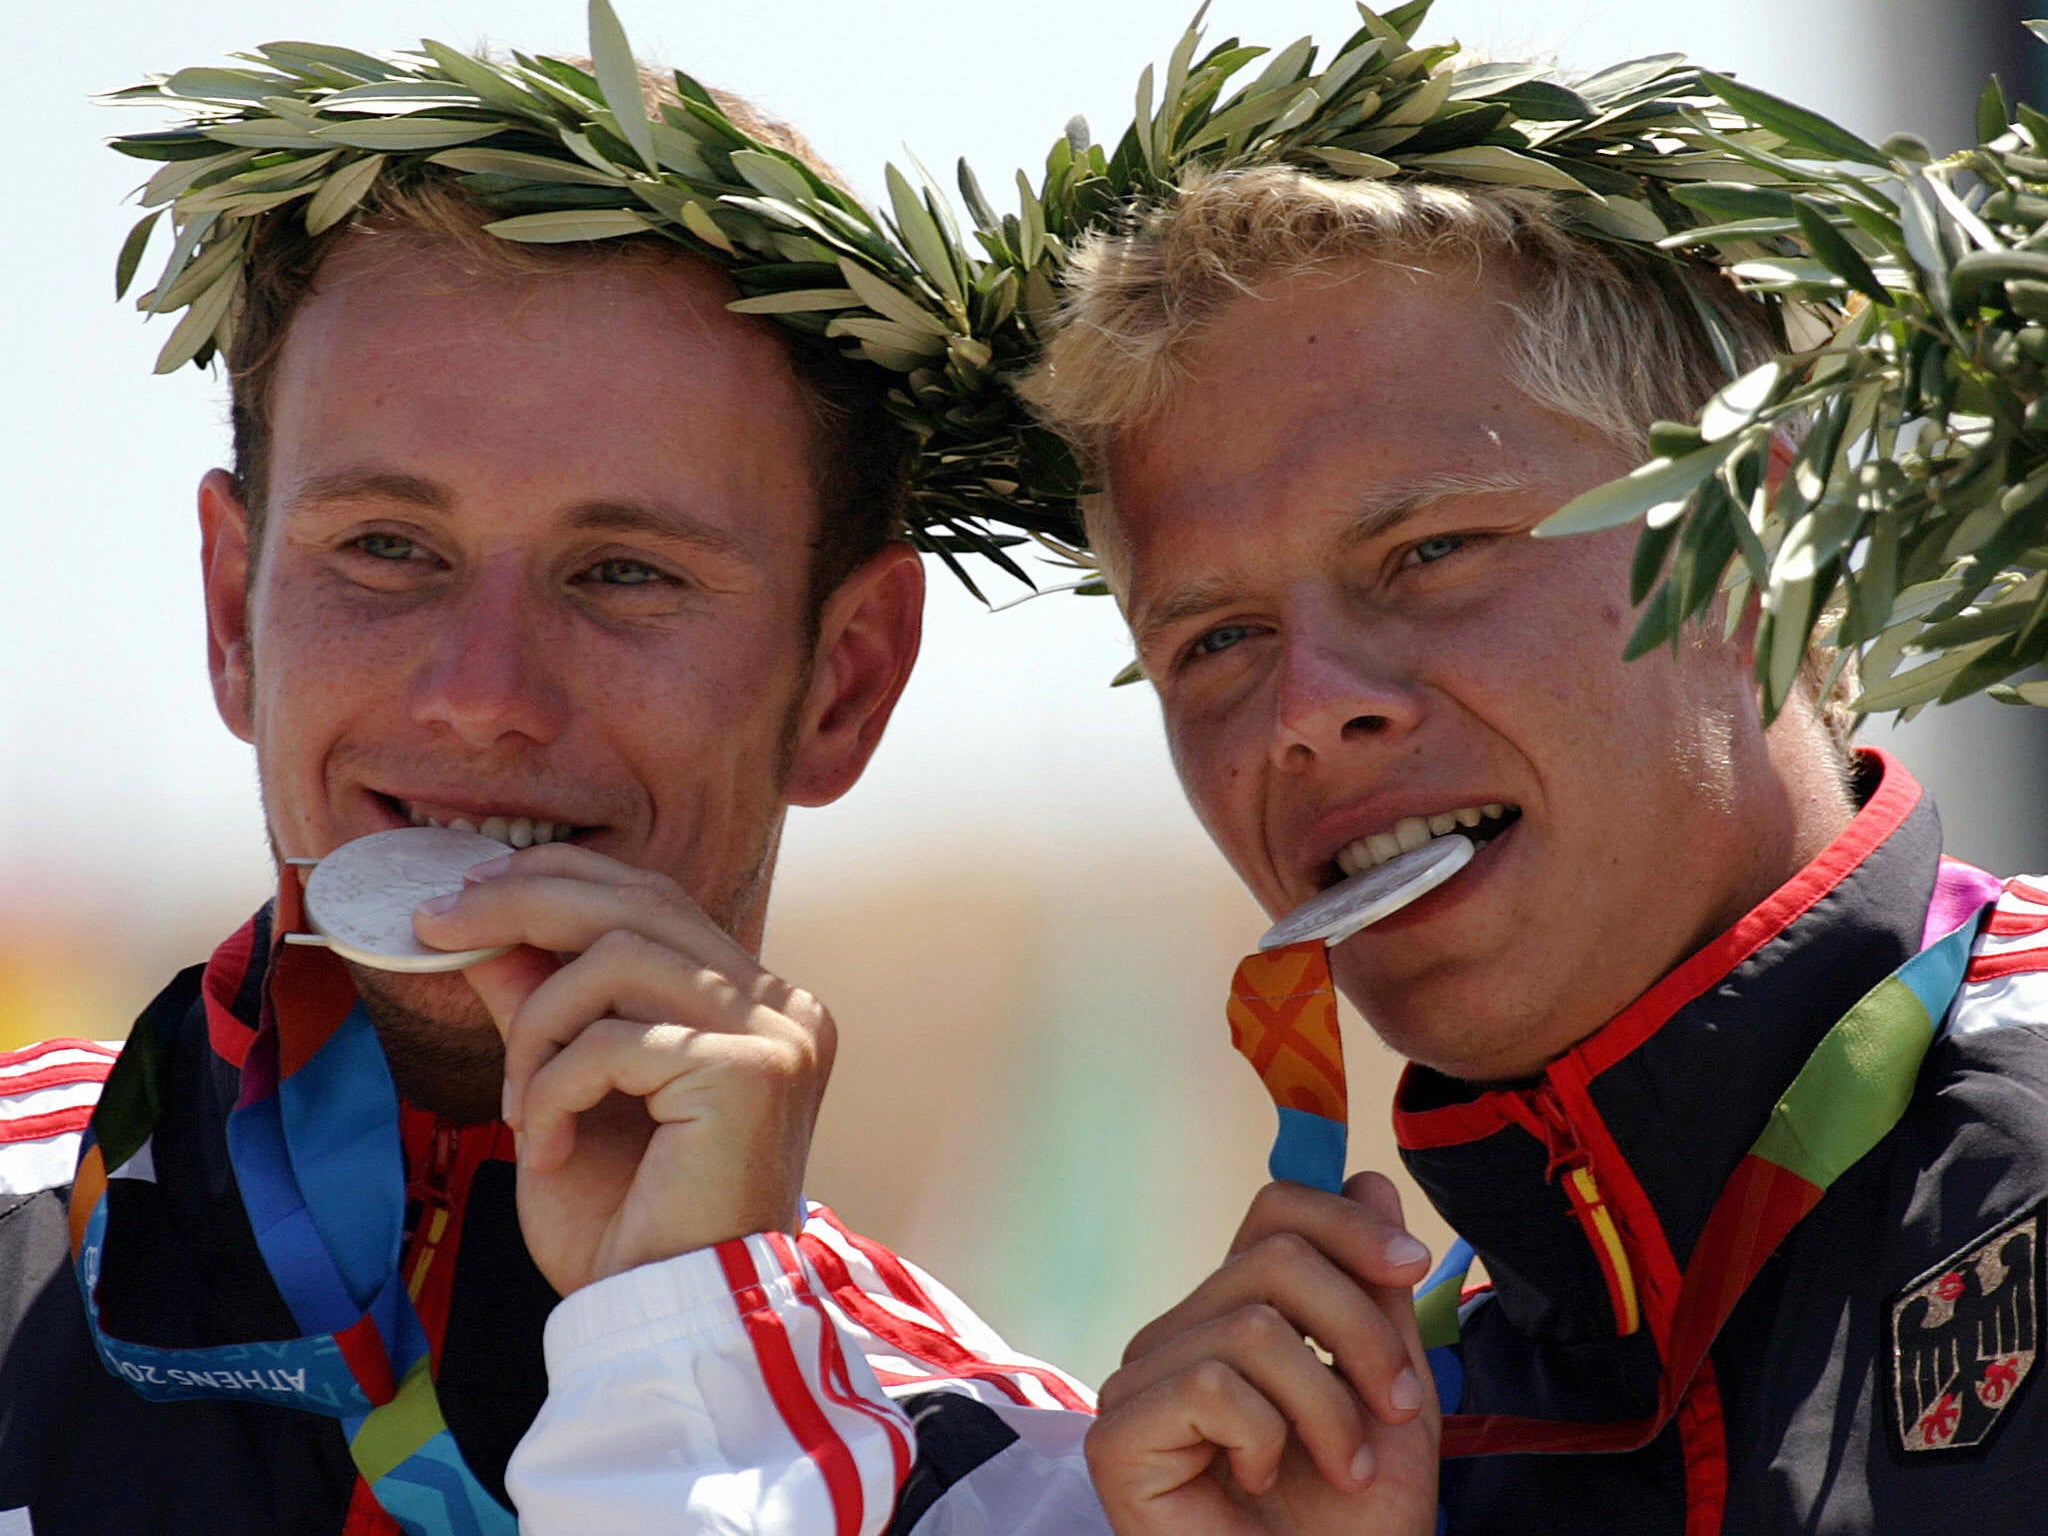 Henze won a silver medal at the 2004 Olympic Games